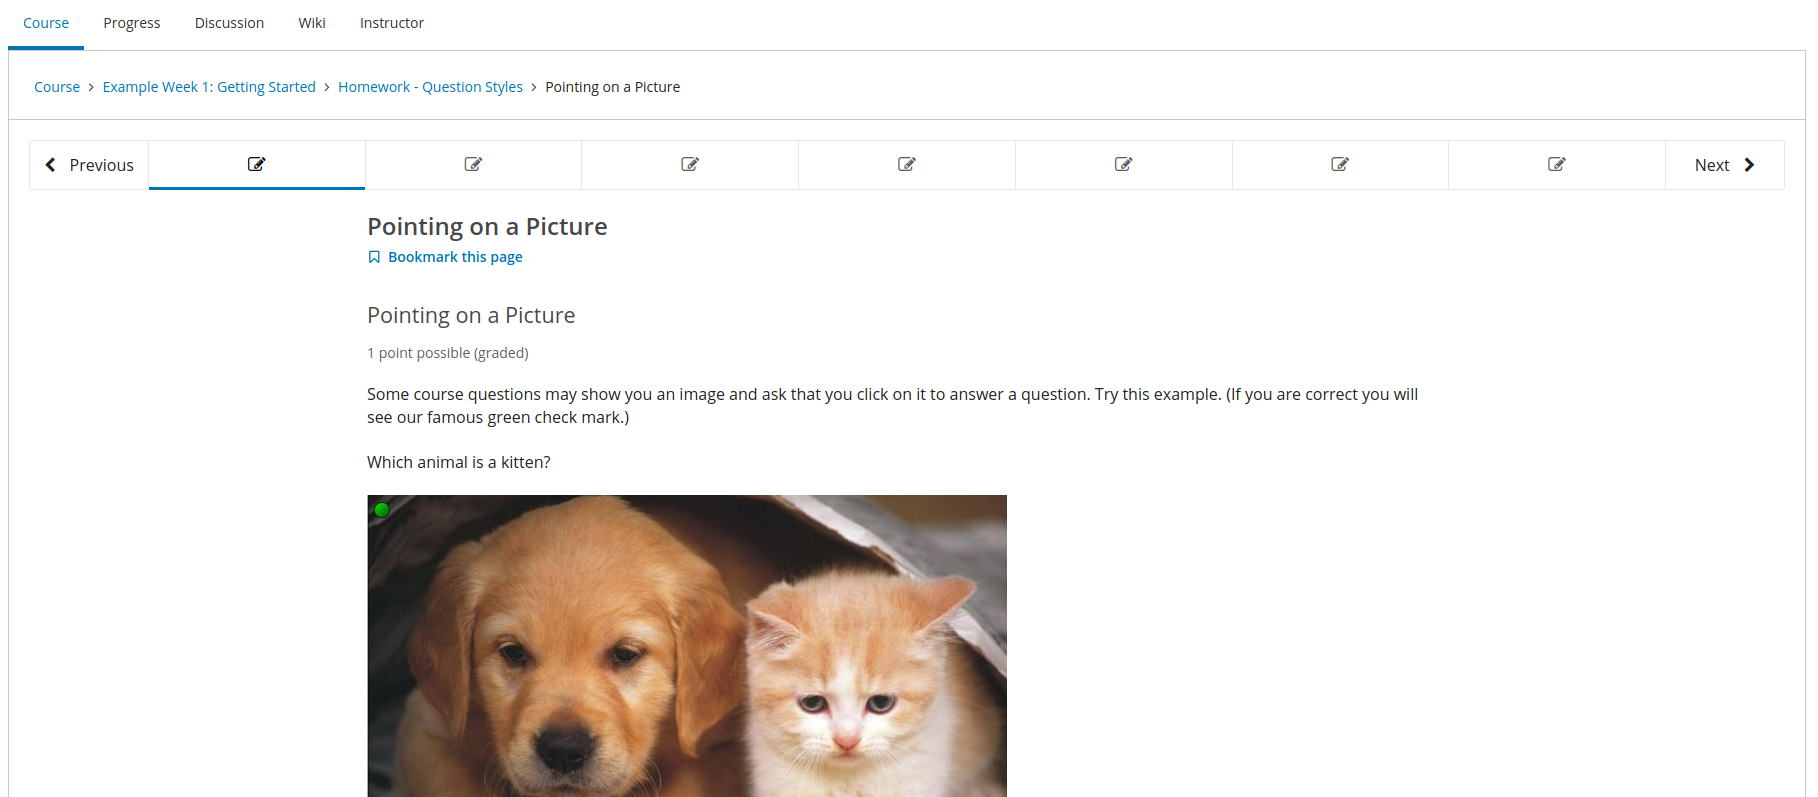 A screenshot from one of Open edx's Components, the LMS. Shown is a problem that has the learner pick out which animal is a kitten.